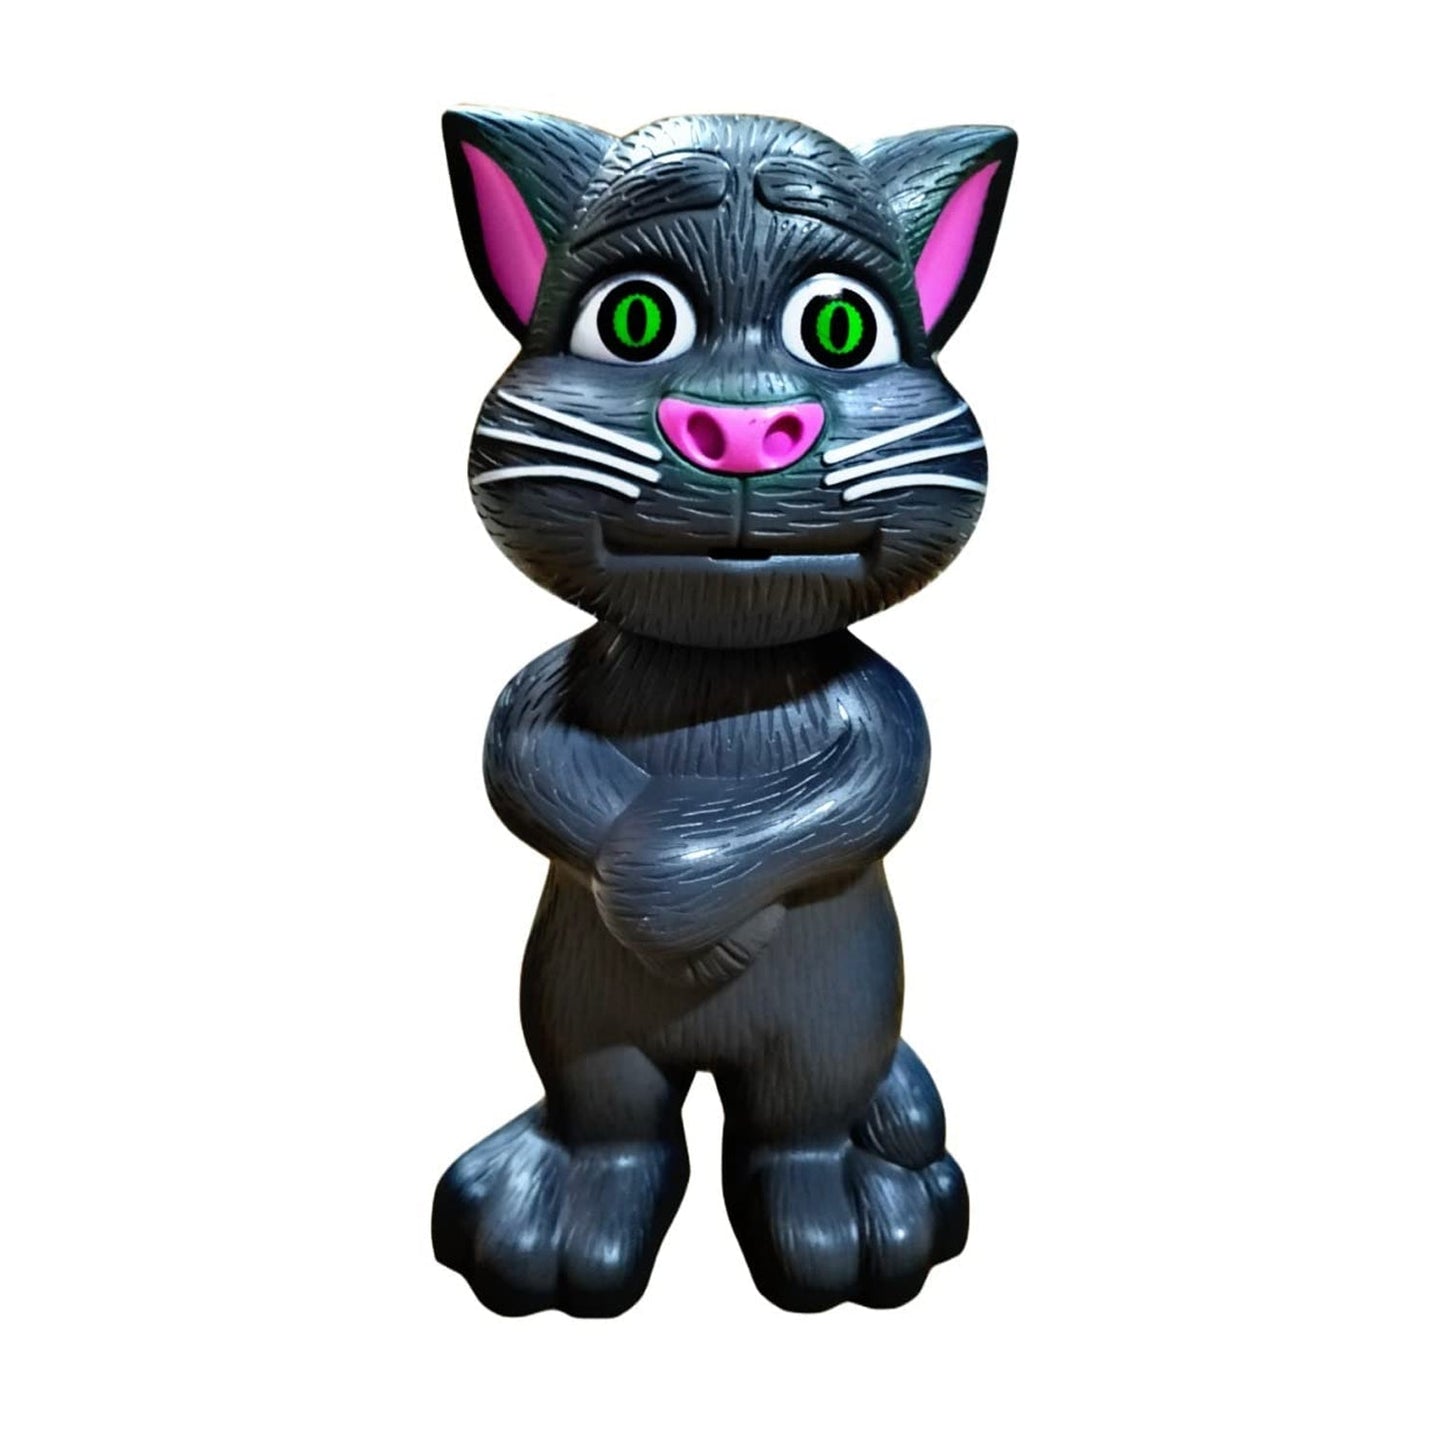 4524 Talking, Mimicry, Touching Tom Cat Intelligent Interactive Toy with Wonderful Voice for Kids, Children Playing and Home Decorate. DeoDap